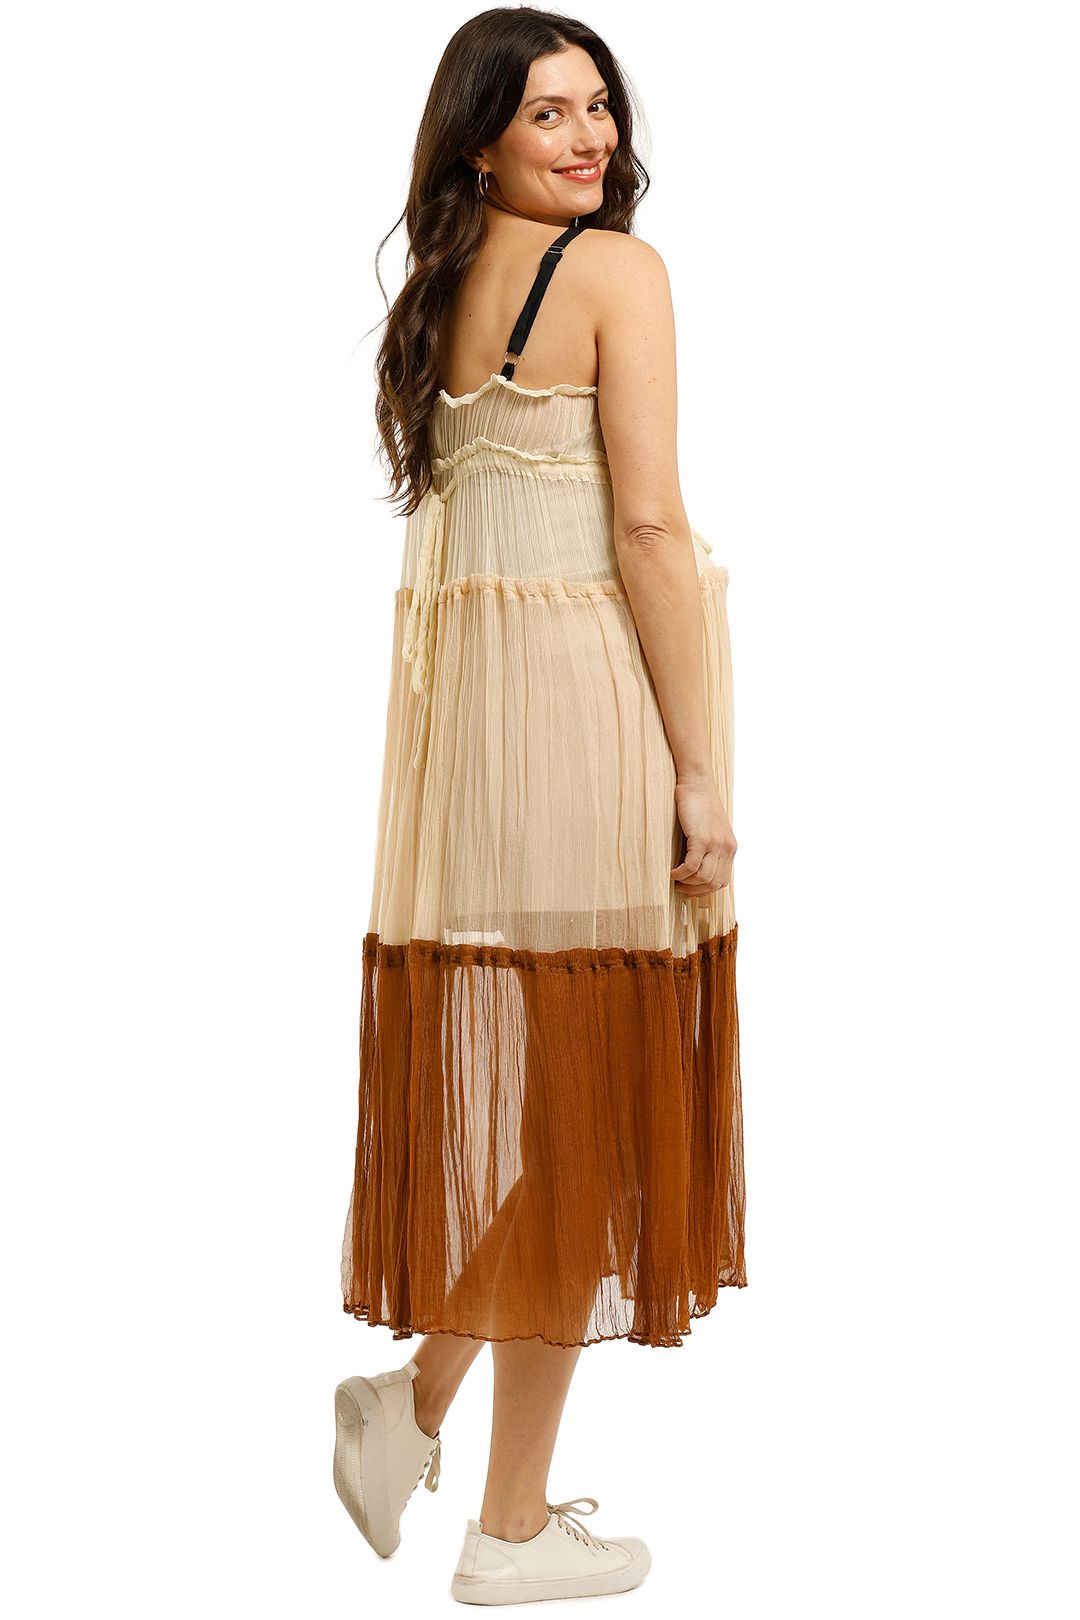 Ministry-of-Style-The-Prairie-Girl-Maxi-Dress-Cinnamon-Back